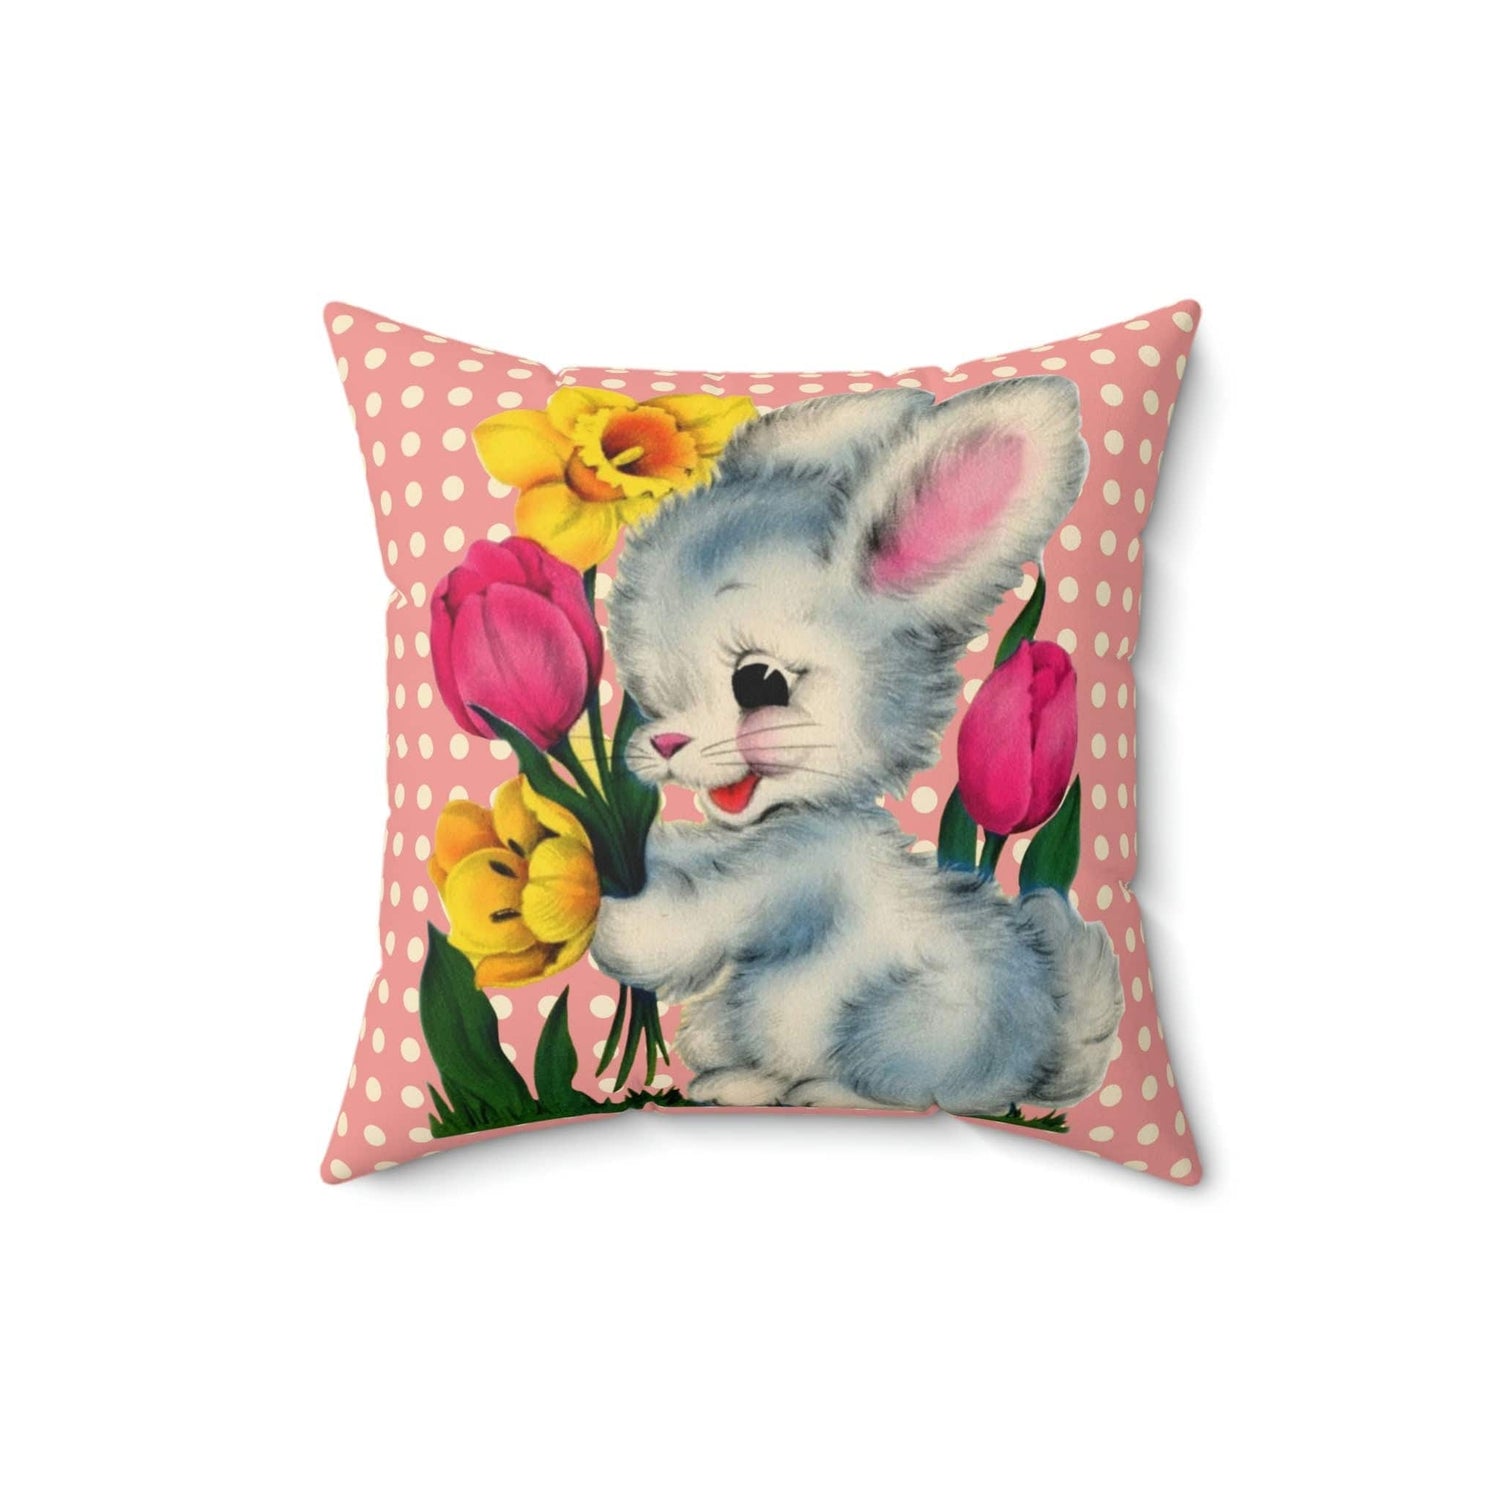 Kate McEnroe New York Vintage Kitschy Easter Bunny Throw Pillow Cover Throw Pillow Covers 16&quot; × 16&quot; 30172568275202466423